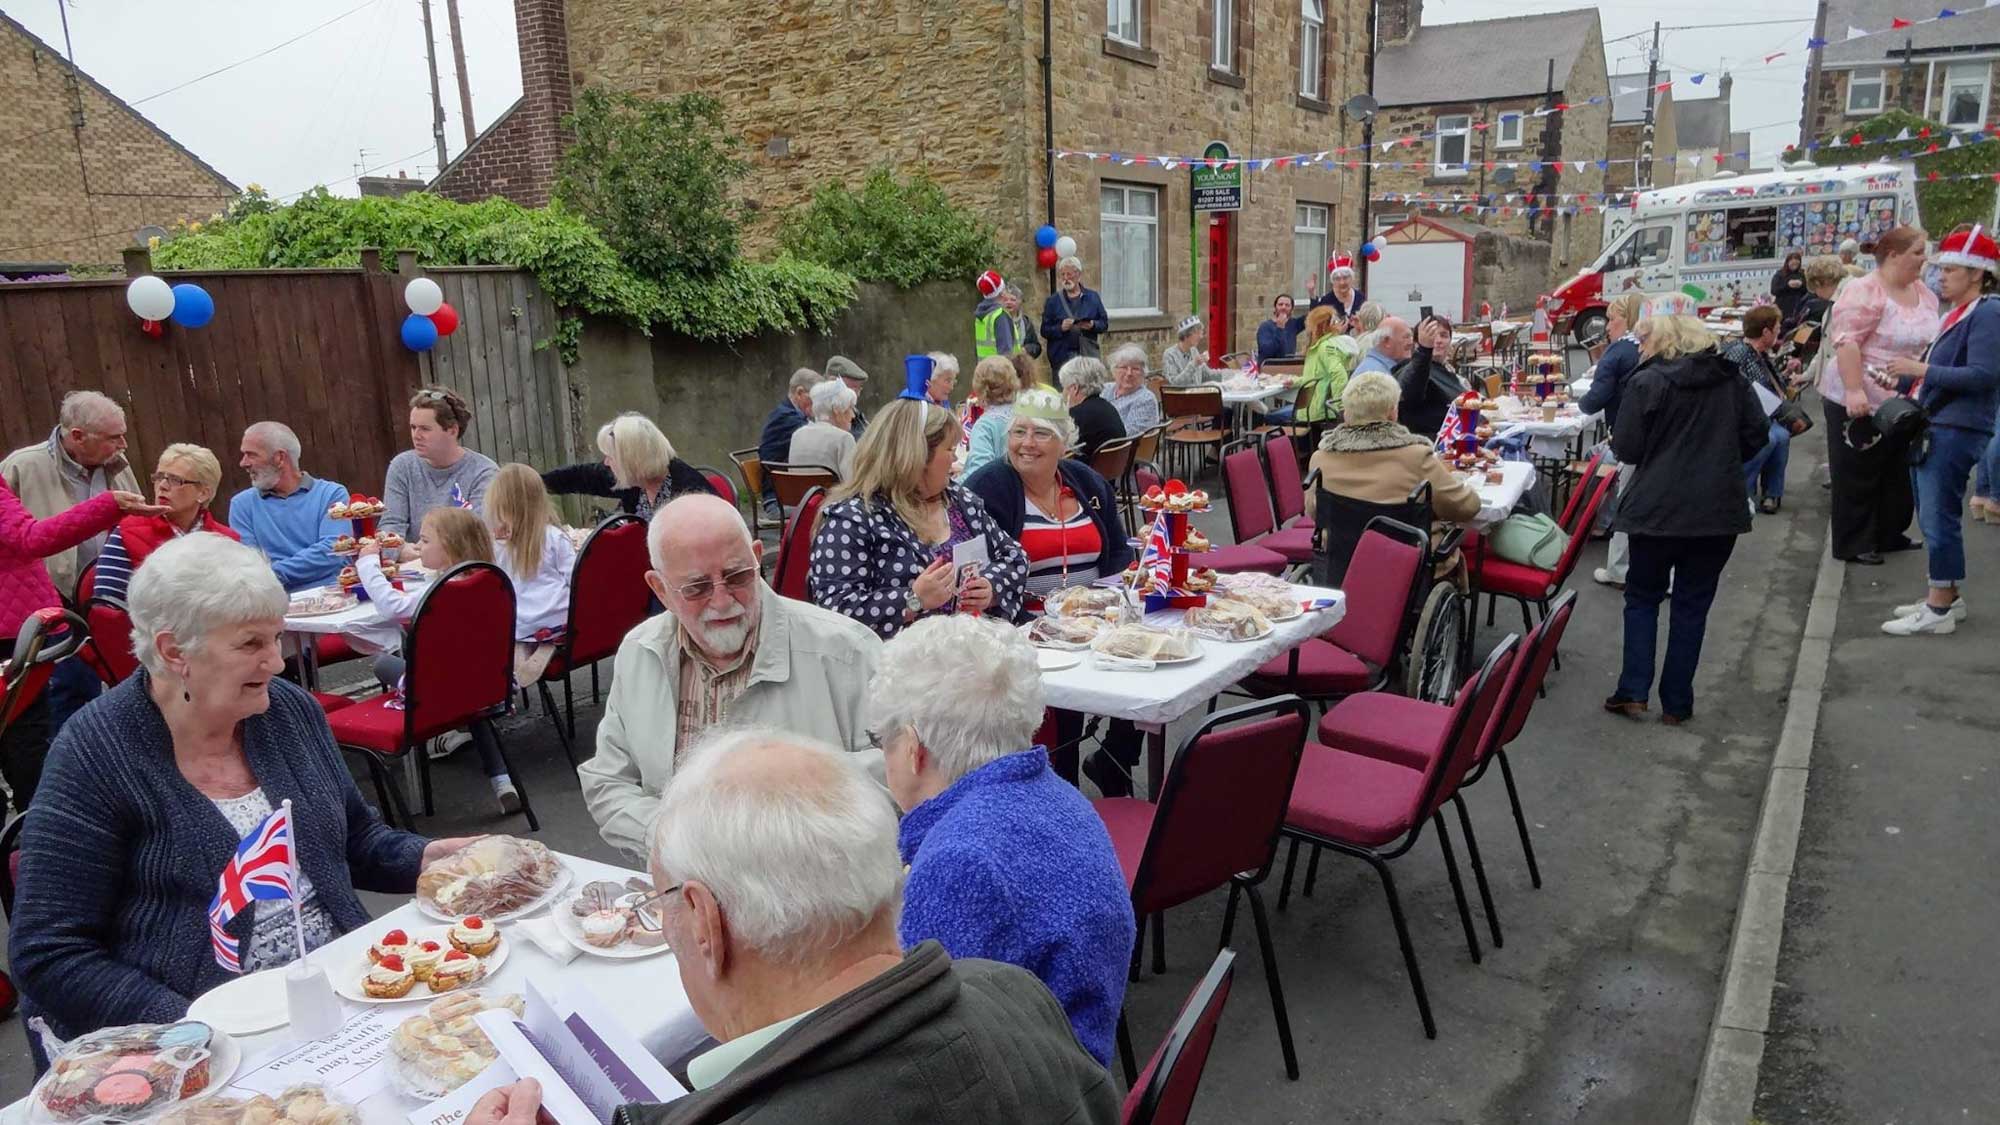 Queen's Jubilee celebration with Blackhill and Shotley Bridge Methodist Church